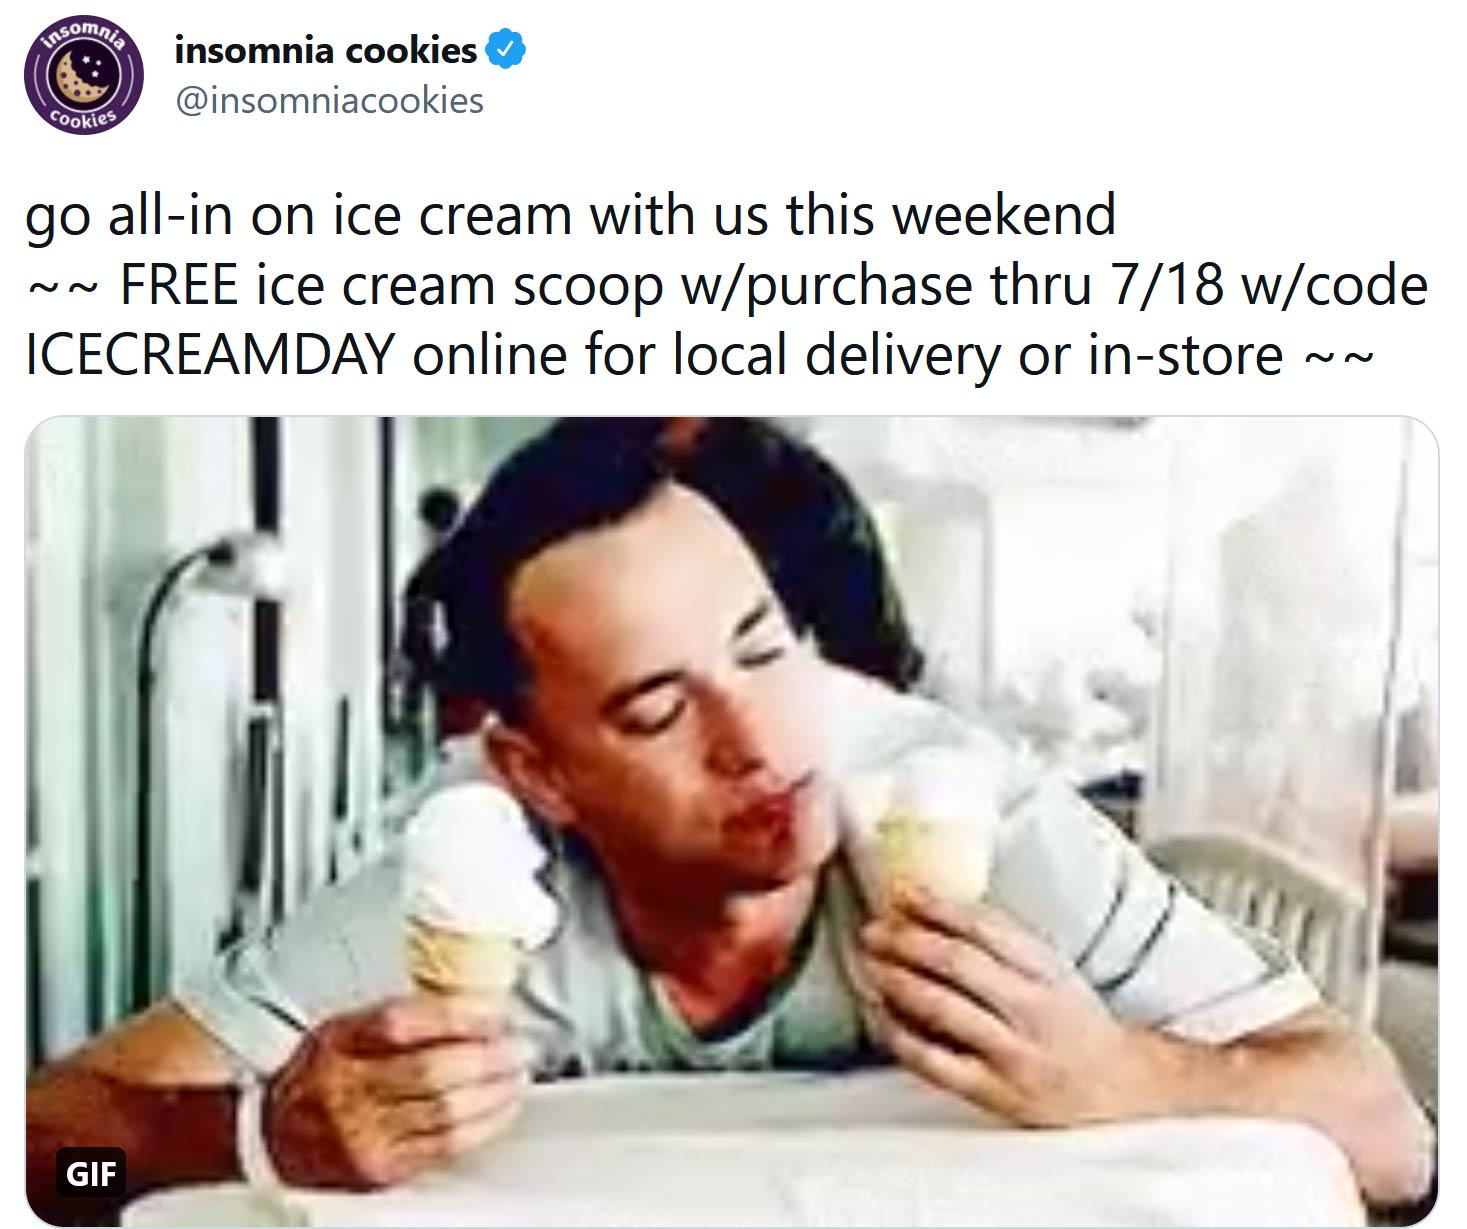 Insomnia Cookies restaurants Coupon  Free ice cream with any purchase today at Insomnia Cookies #insomniacookies 